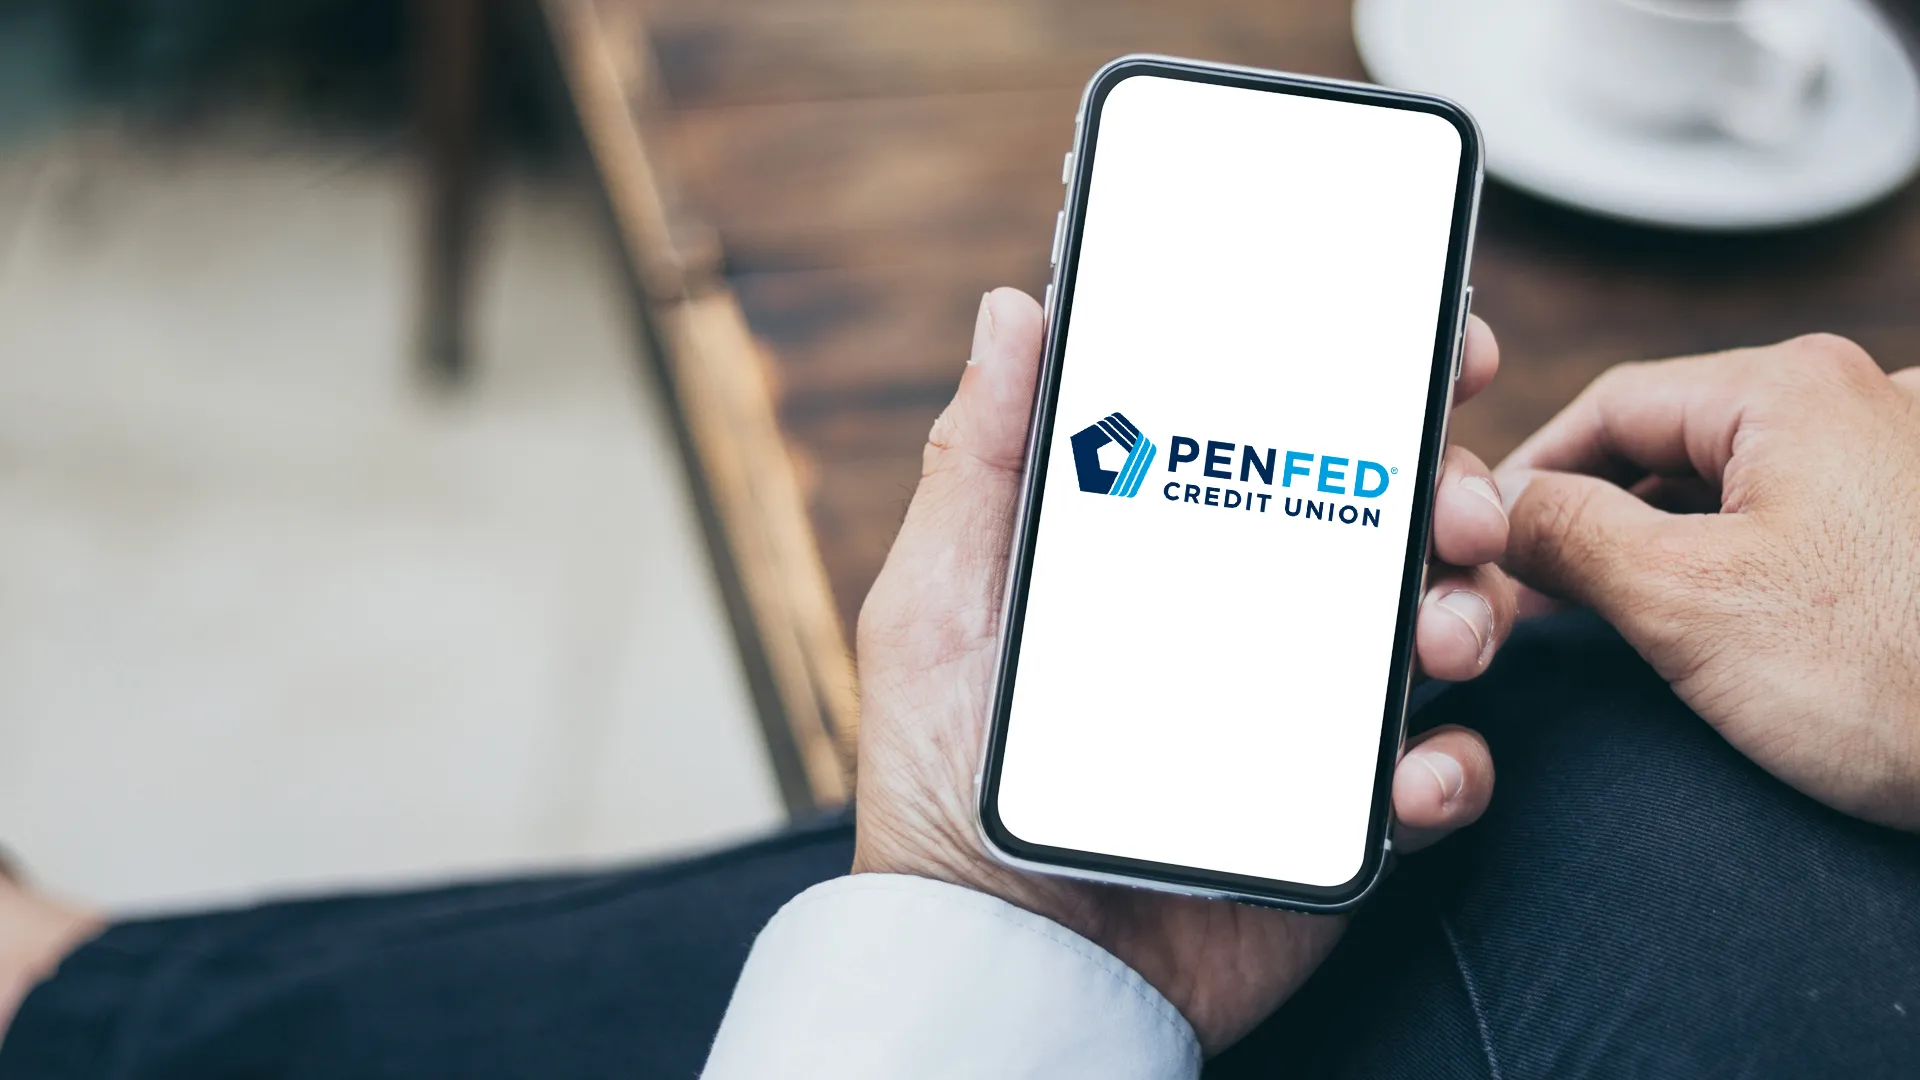 PenFed Credit Union mobile banking app